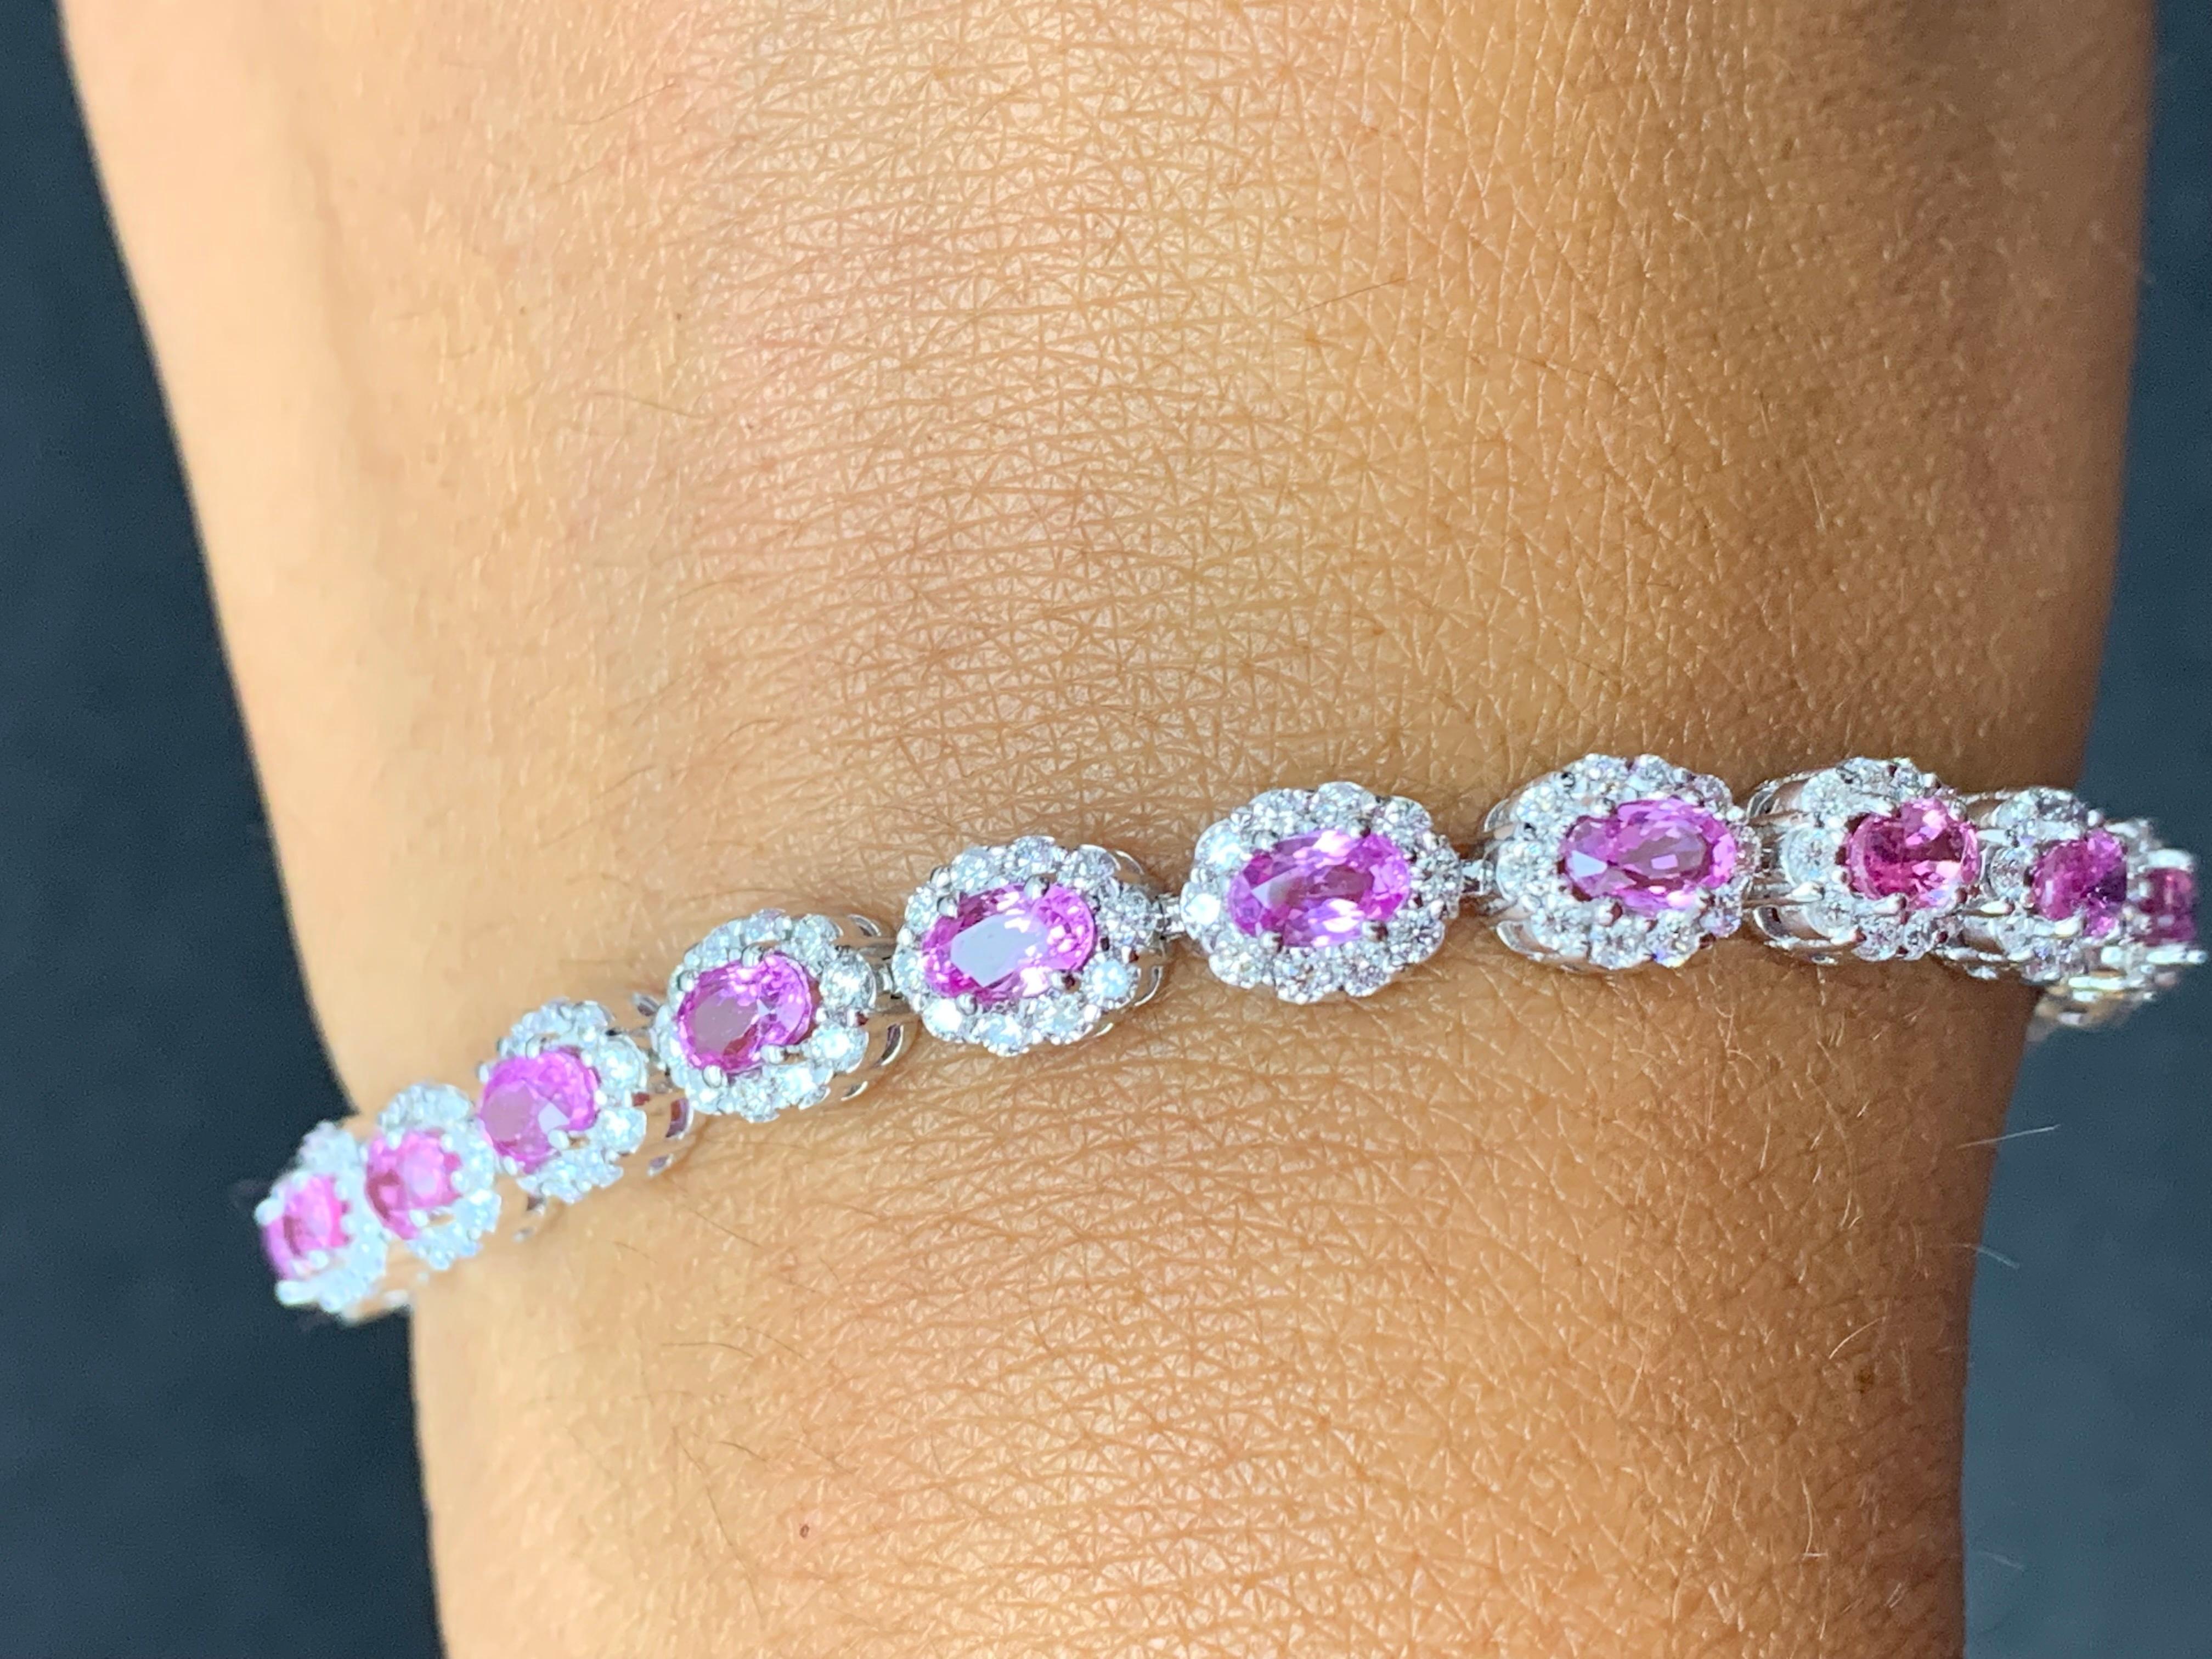 7.21 Carat Oval Cut Pink Sapphire and Diamond Halo Bracelet in 14K White Gold For Sale 3